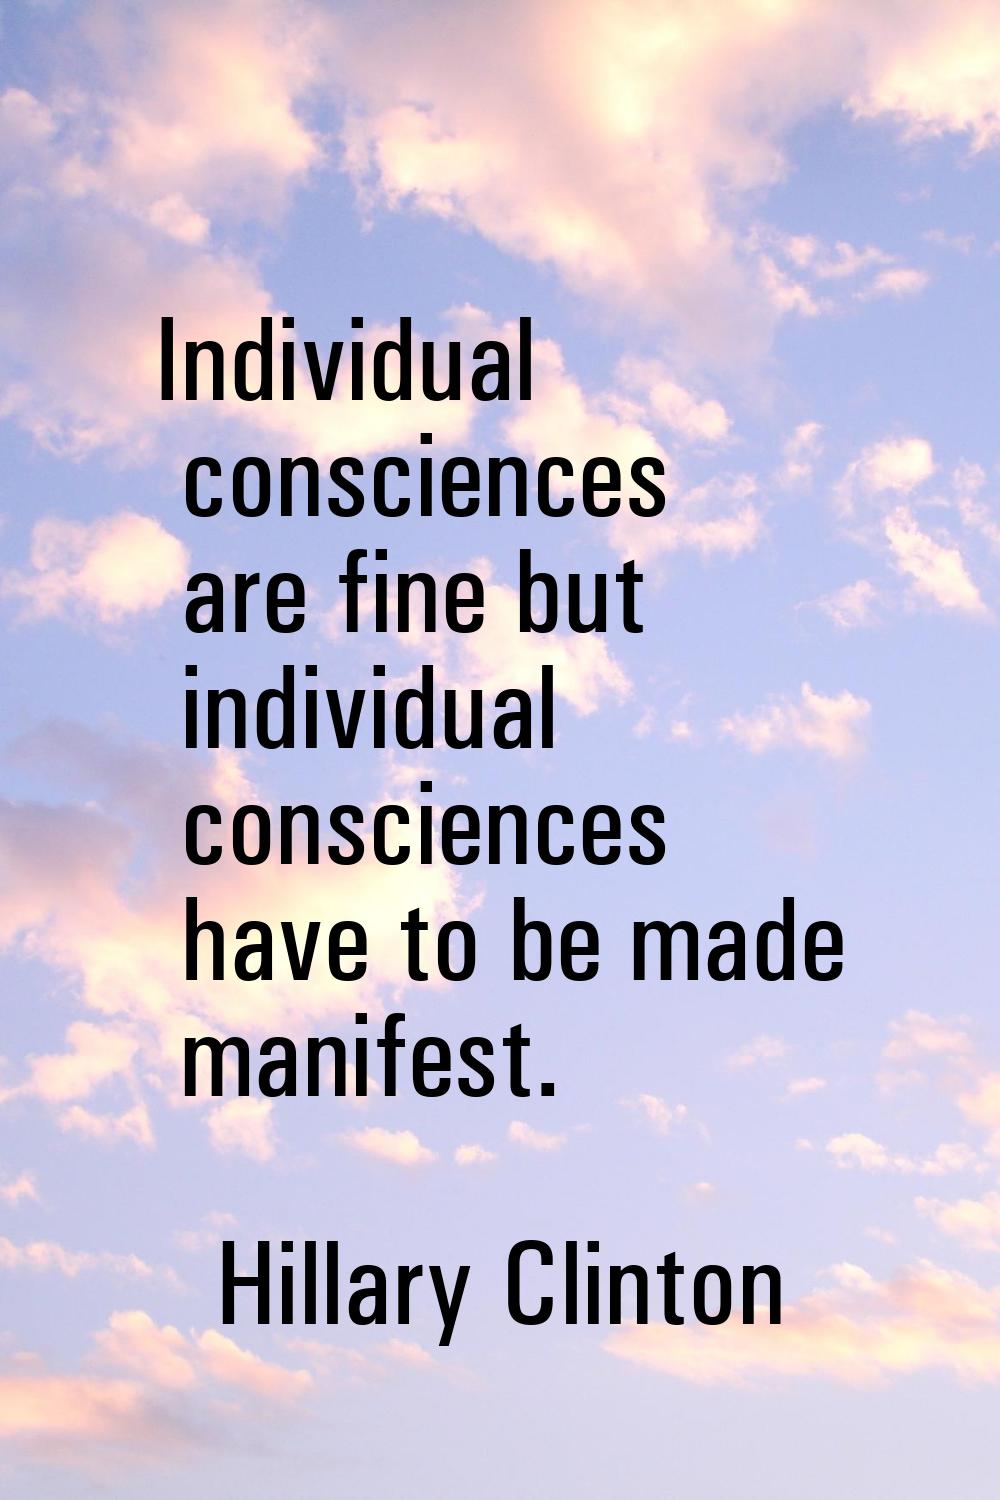 Individual consciences are fine but individual consciences have to be made manifest.